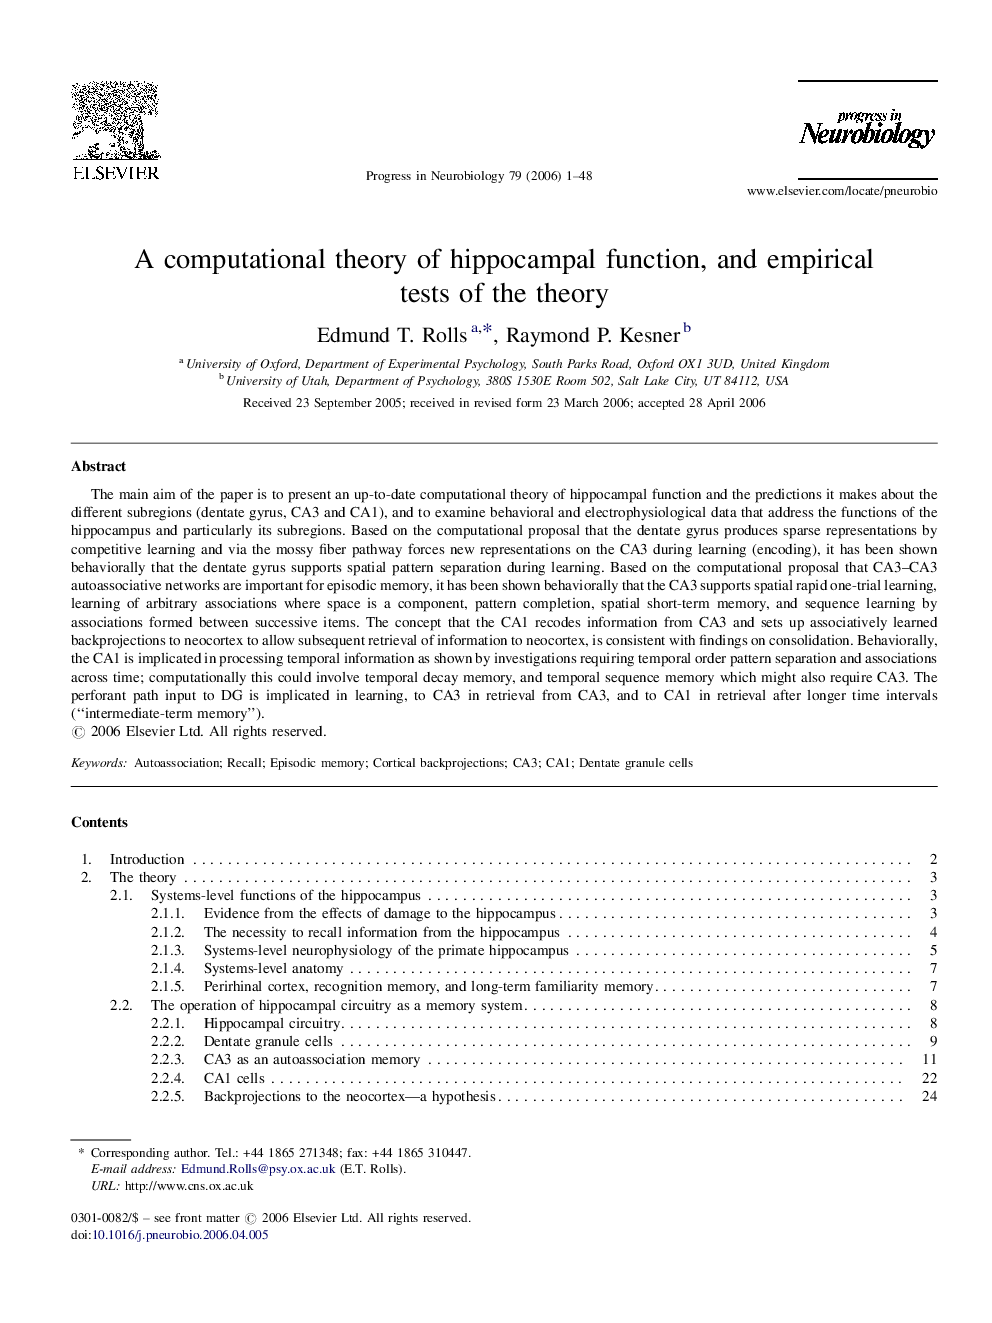 A computational theory of hippocampal function, and empirical tests of the theory